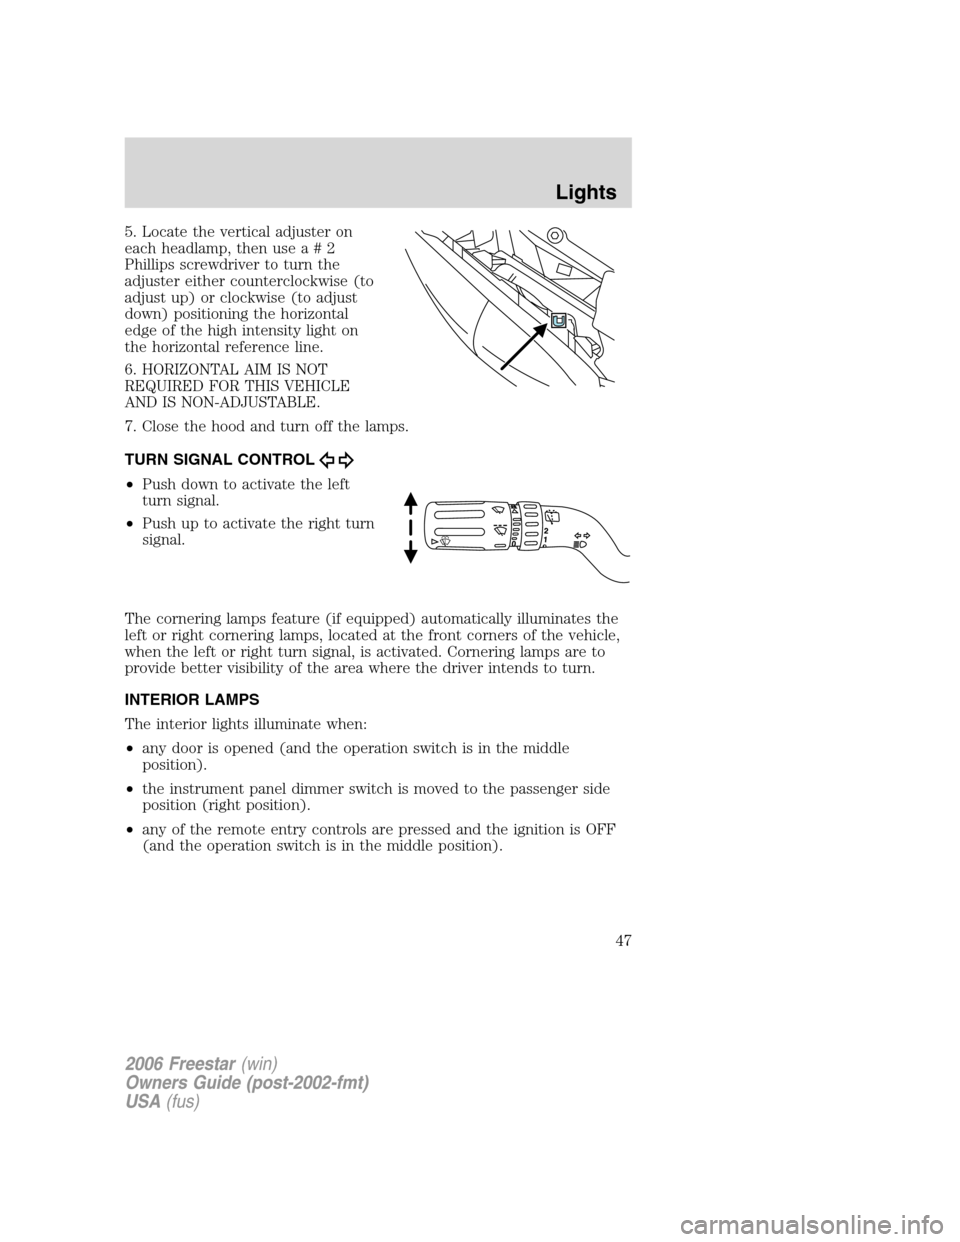 FORD FREESTAR 2006 1.G Owners Manual 5. Locate the vertical adjuster on
each headlamp, then usea#2
Phillips screwdriver to turn the
adjuster either counterclockwise (to
adjust up) or clockwise (to adjust
down) positioning the horizontal
